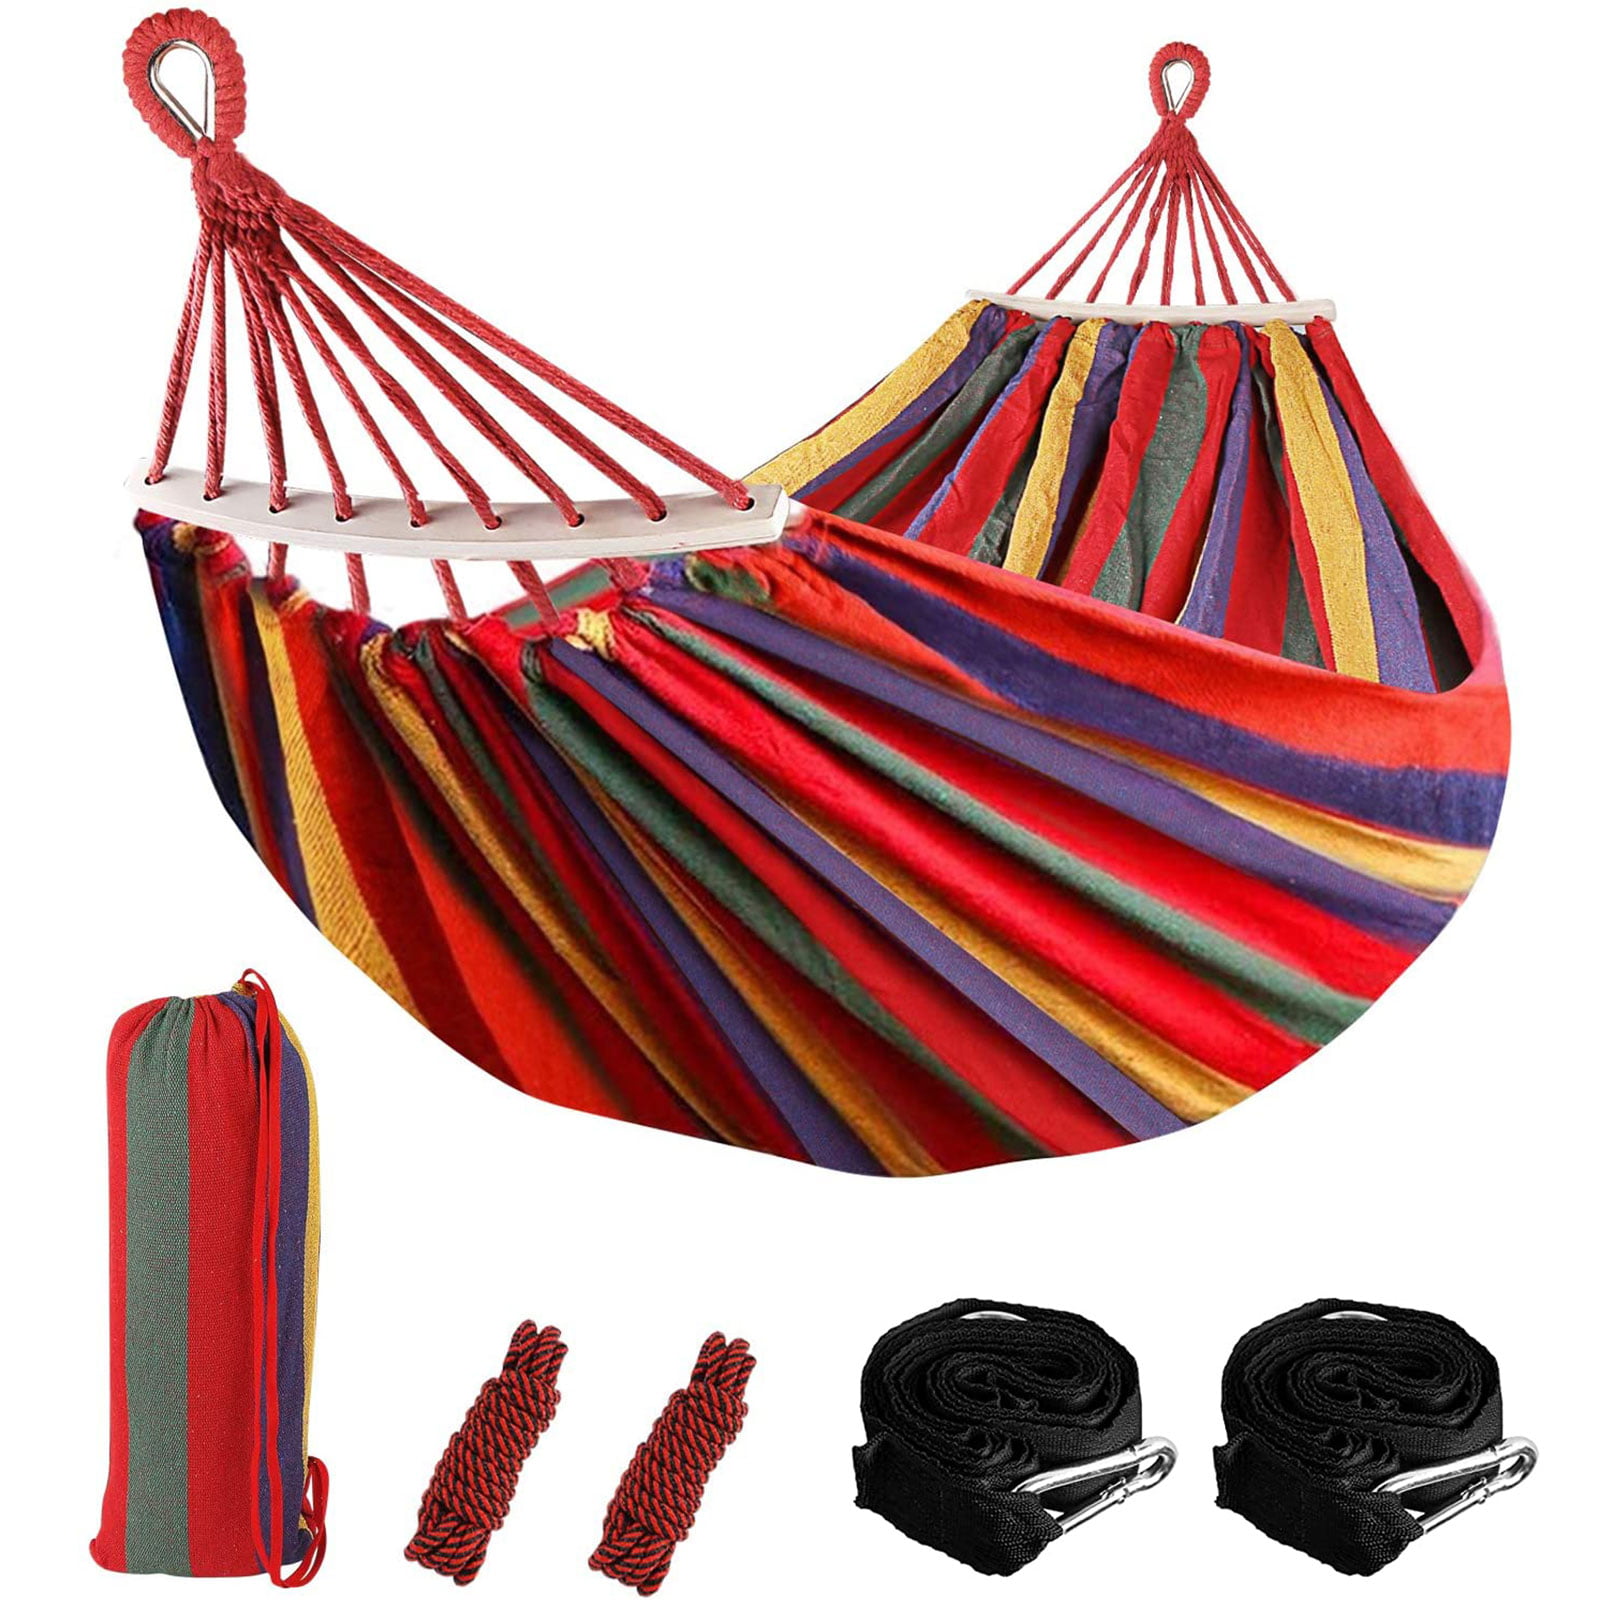 Portable Camping Hammock with Stand for 2 person Outdoor Travel Patio Bed Swing 